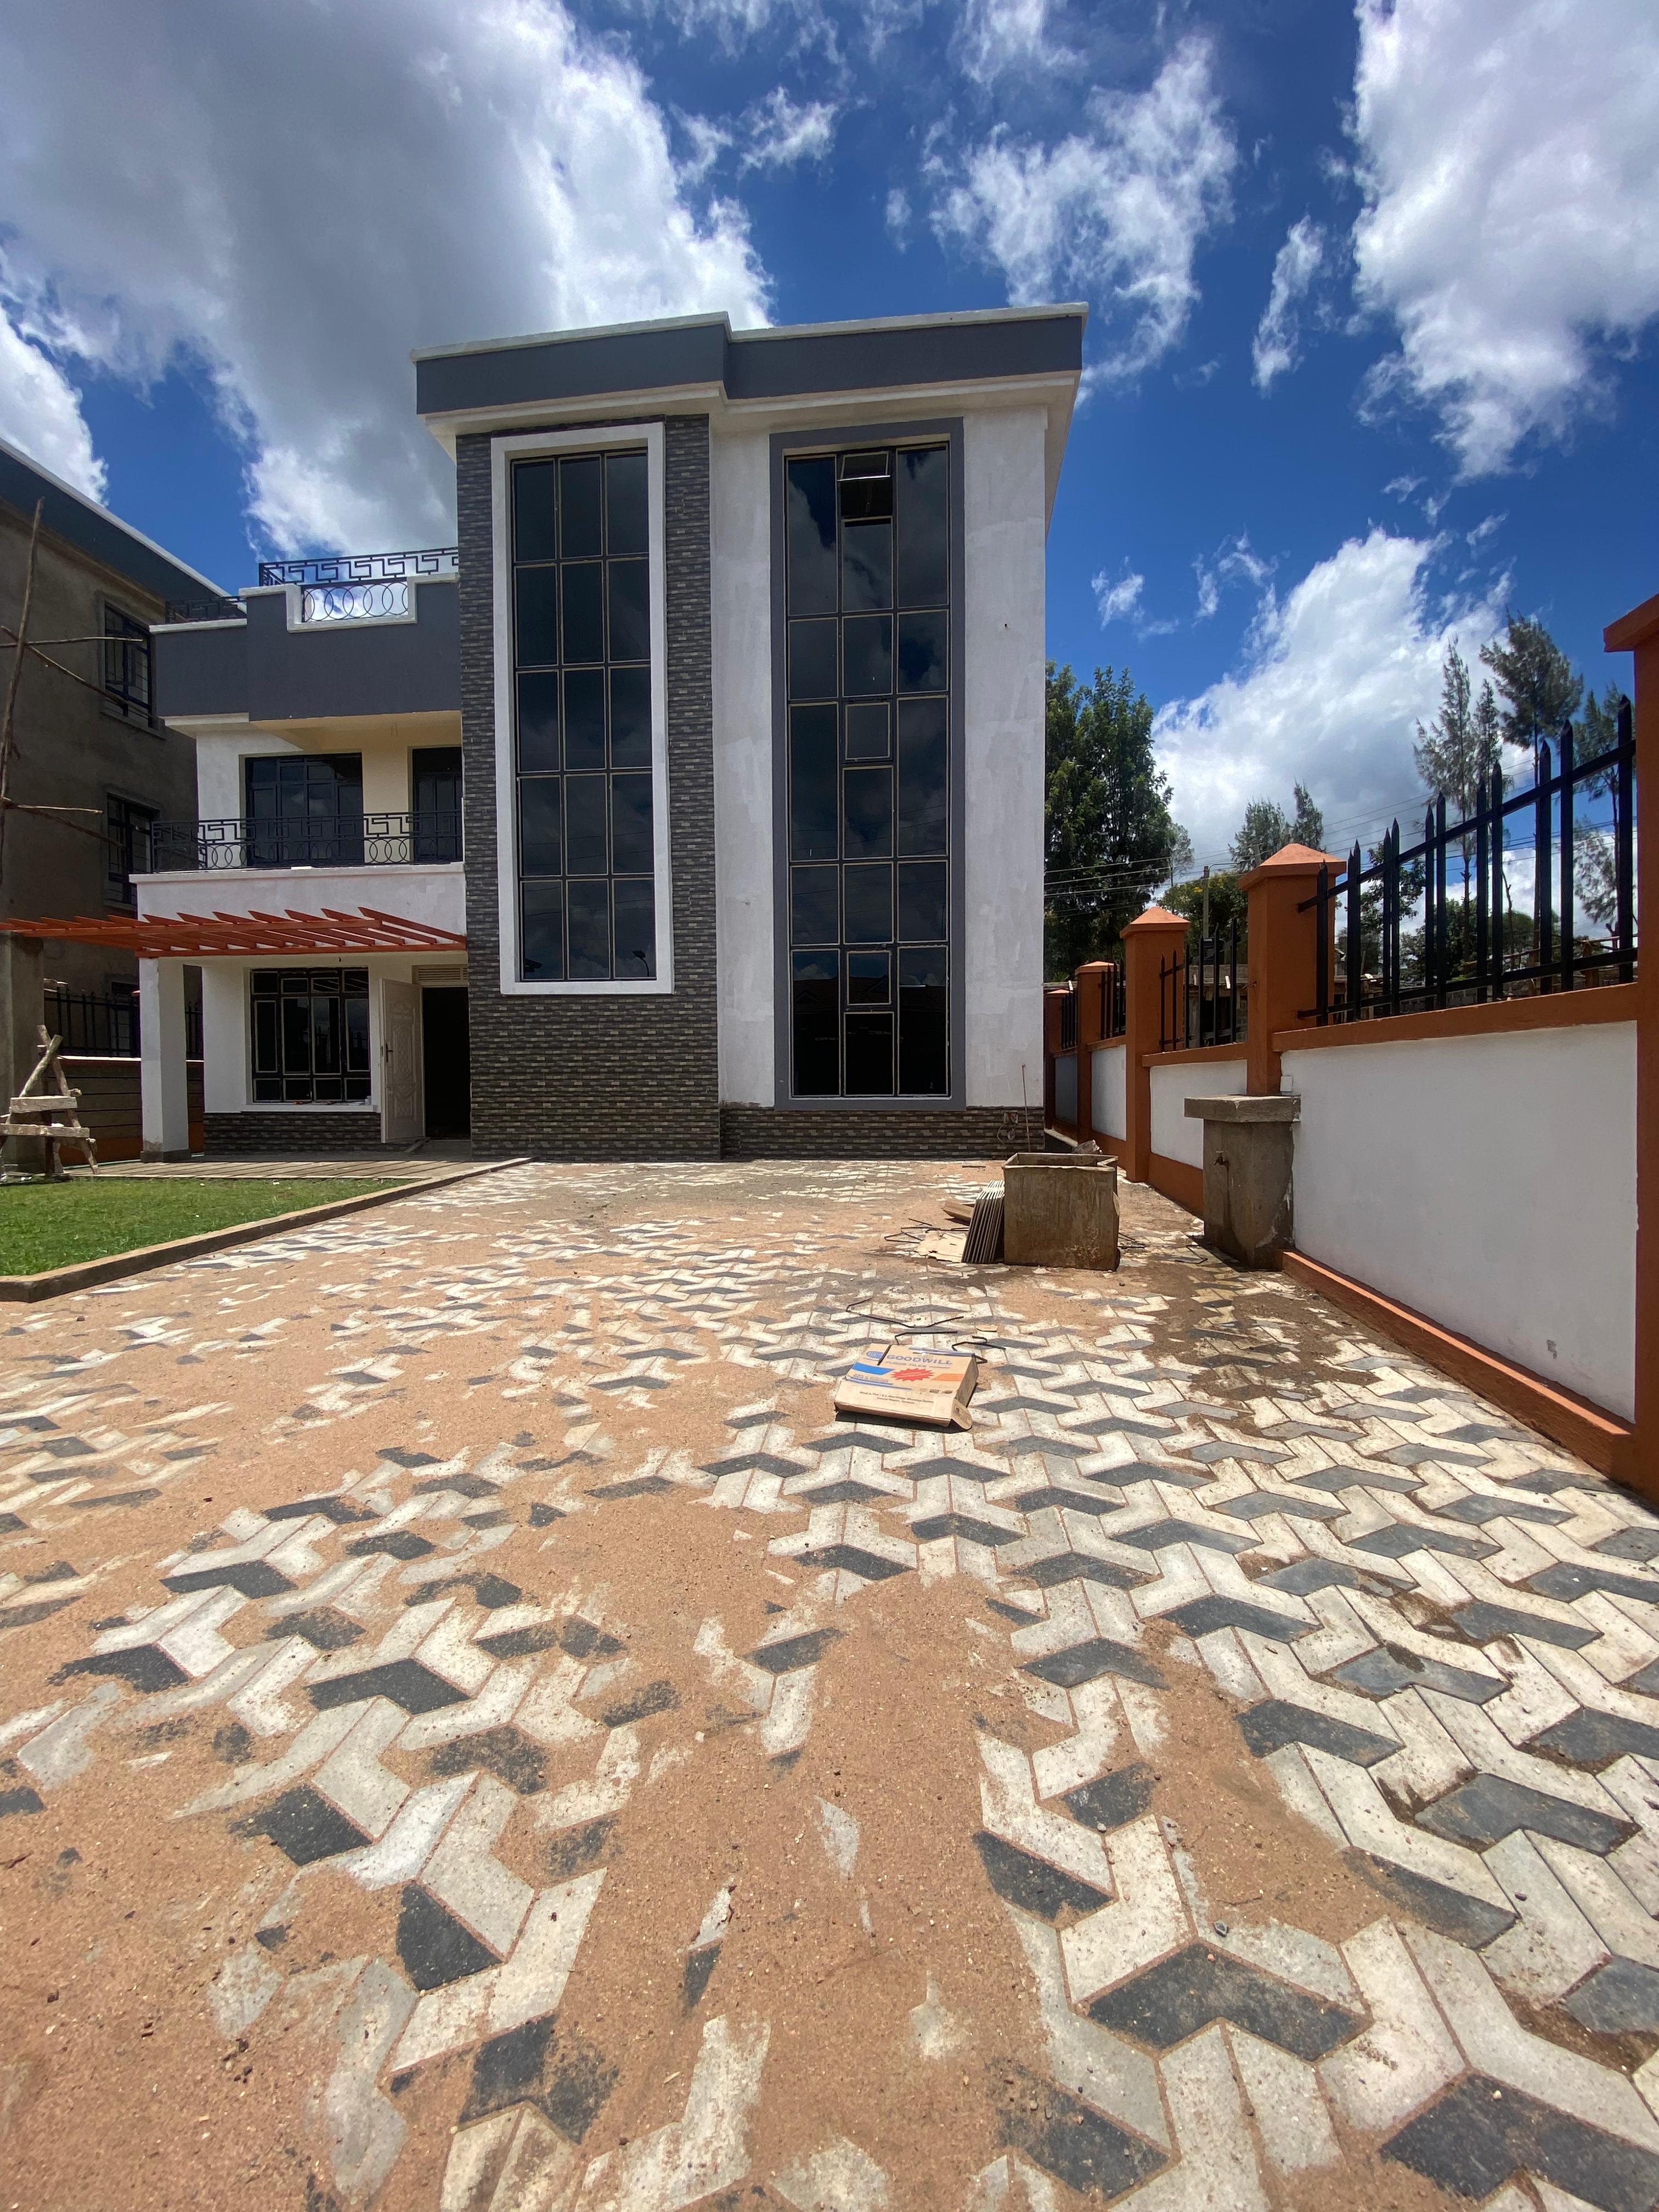 Spacious 5 Bedroom Plus 2 DSQ Townhouse For Sale in Kamiti. Has all en suite bedrooms, good security and a garden. Asking Price. 24.5 M. Musilli Homes.